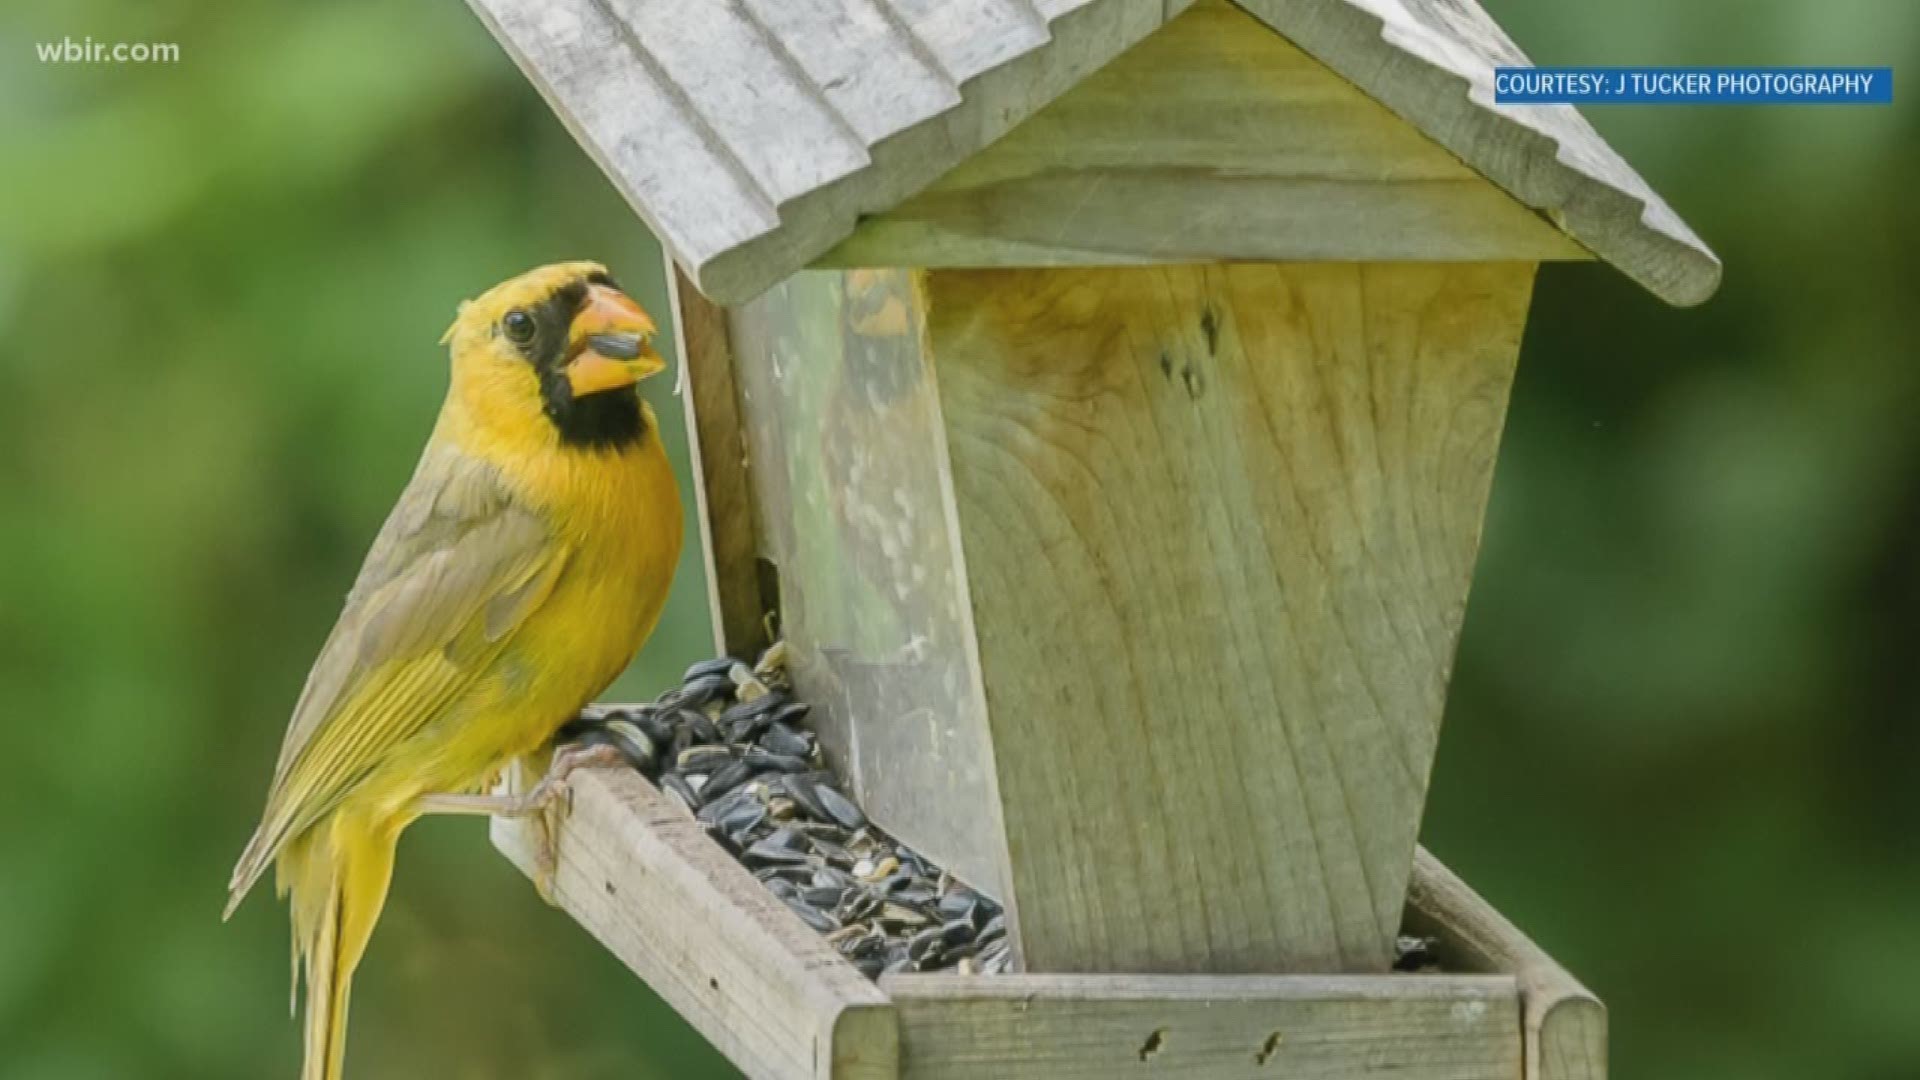 A Knoxville photographer is getting plenty of attention for capturing photos of a rare bird, right here in East Tennessee. Jimmy Tucker took these stunning photos of the yellow cardinal in Roane County.